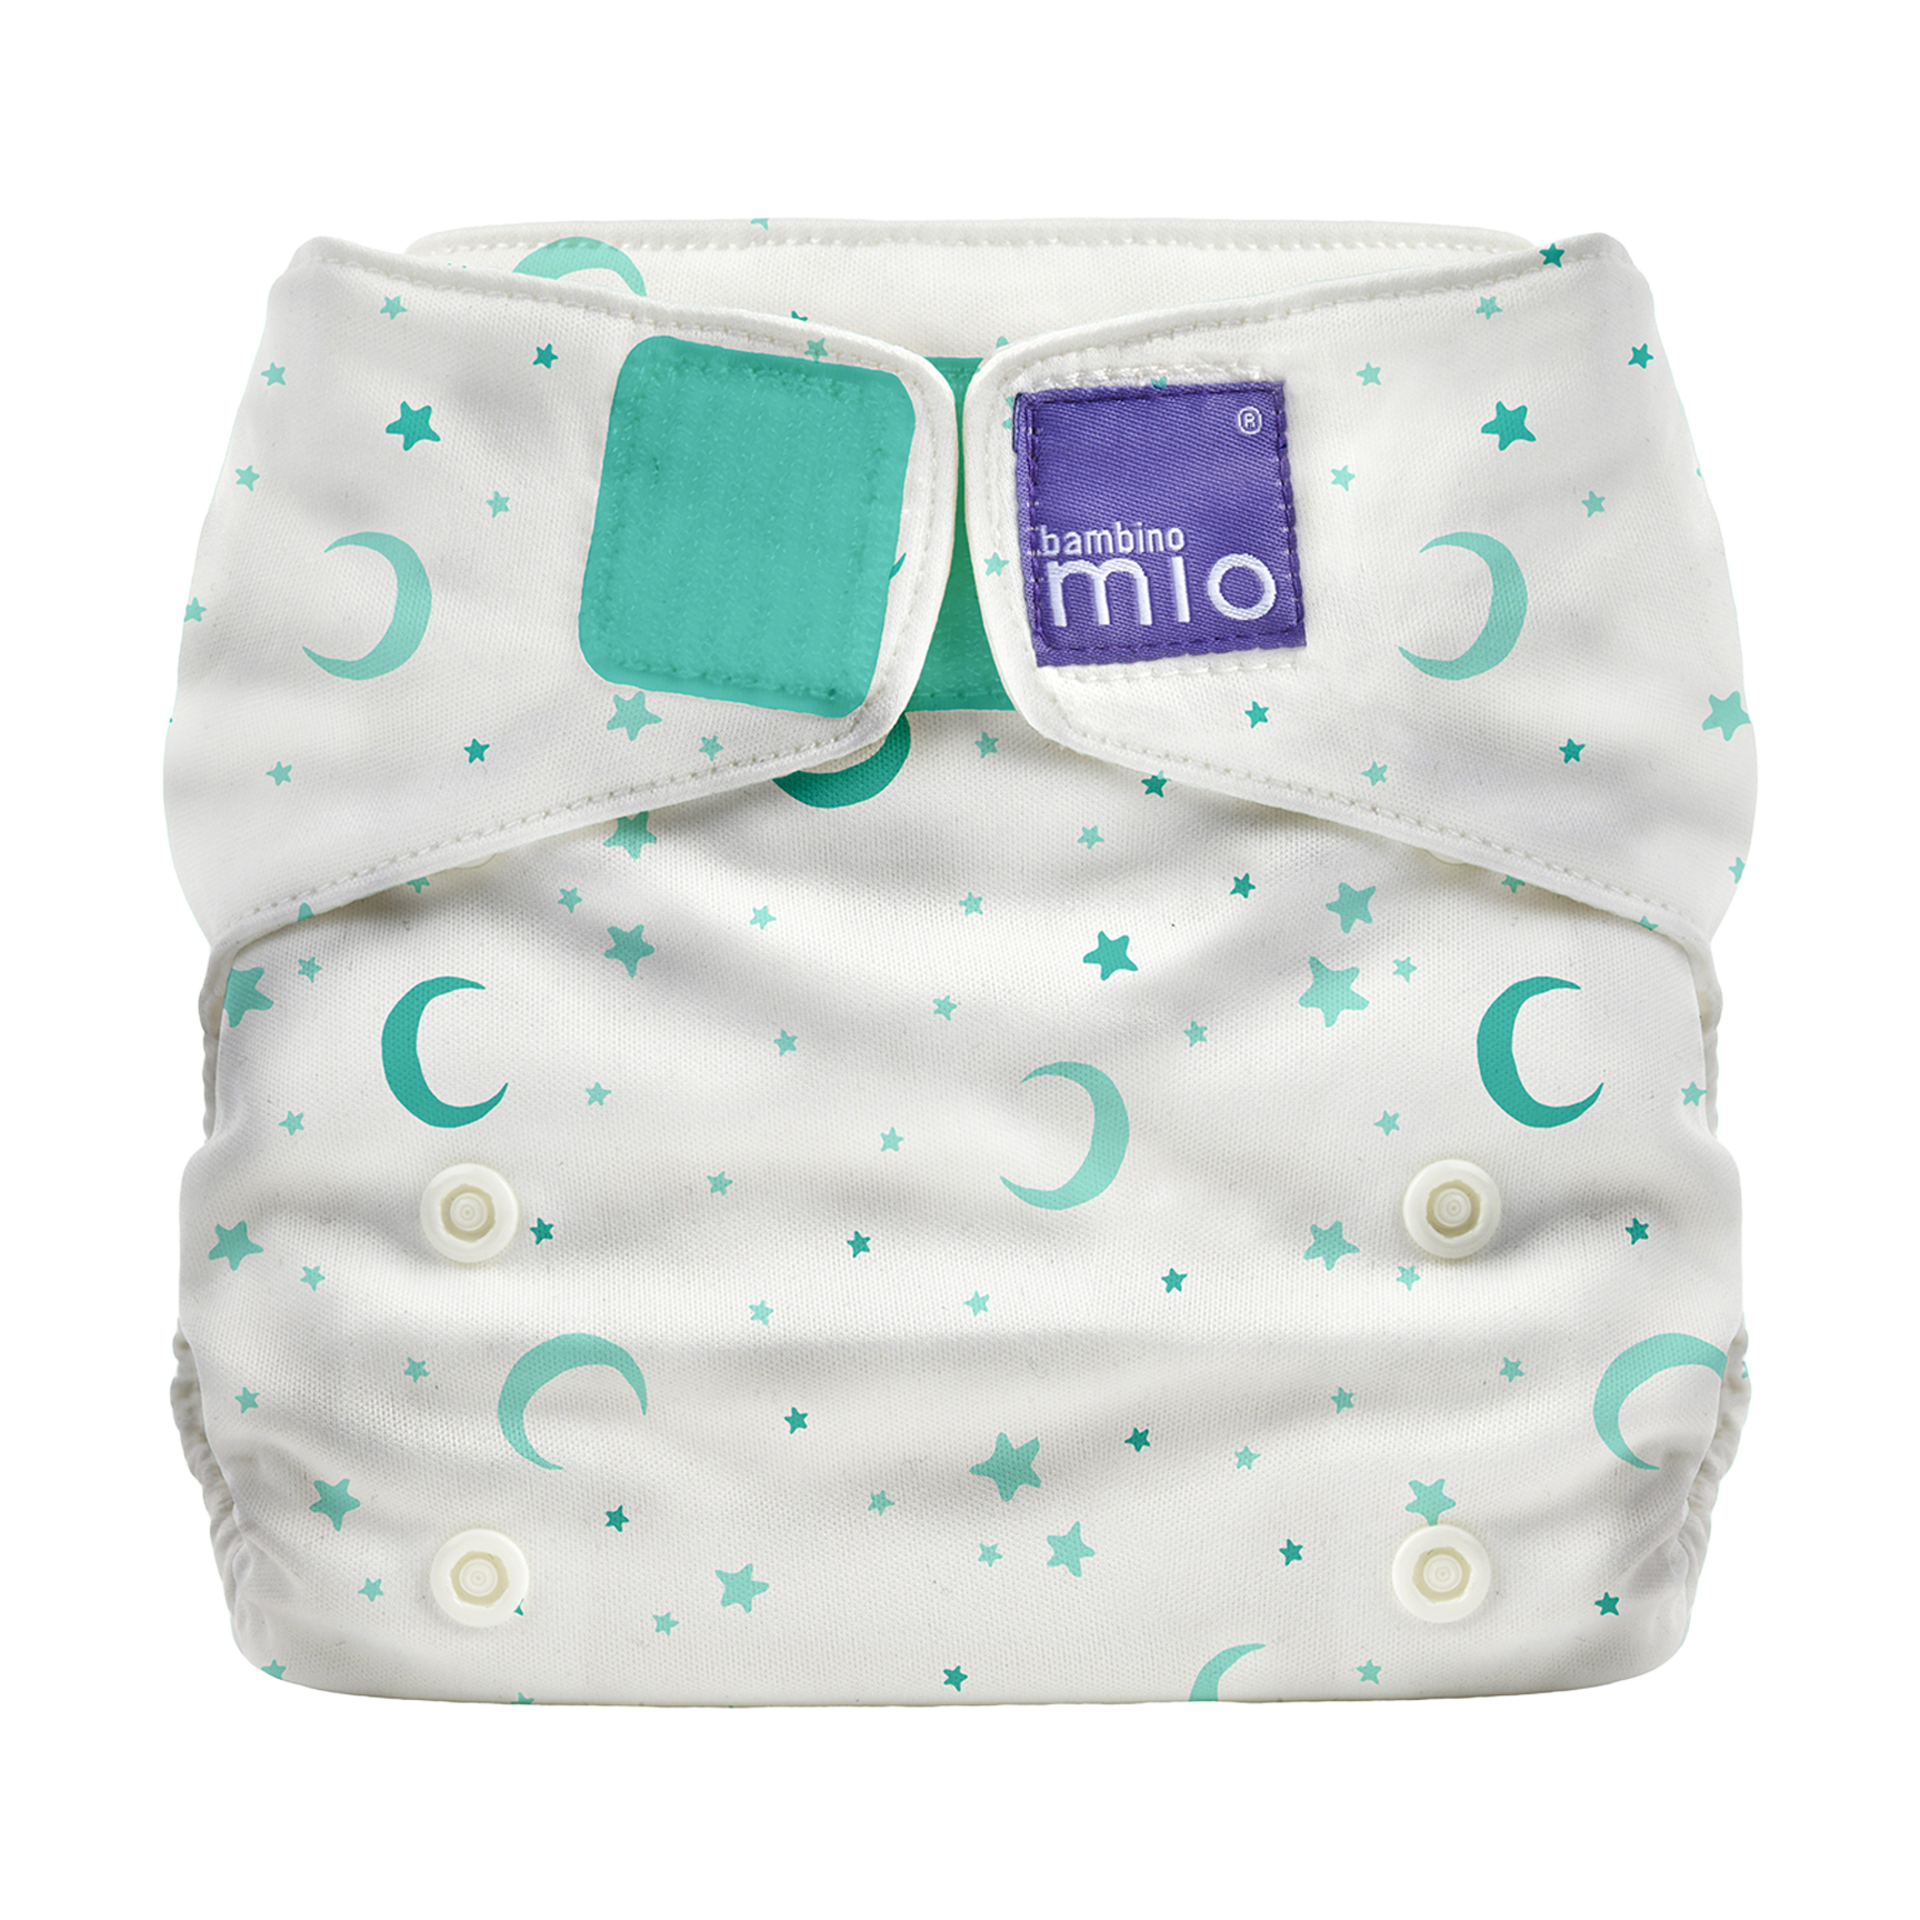 6 Best Cloth Diapers of 2020